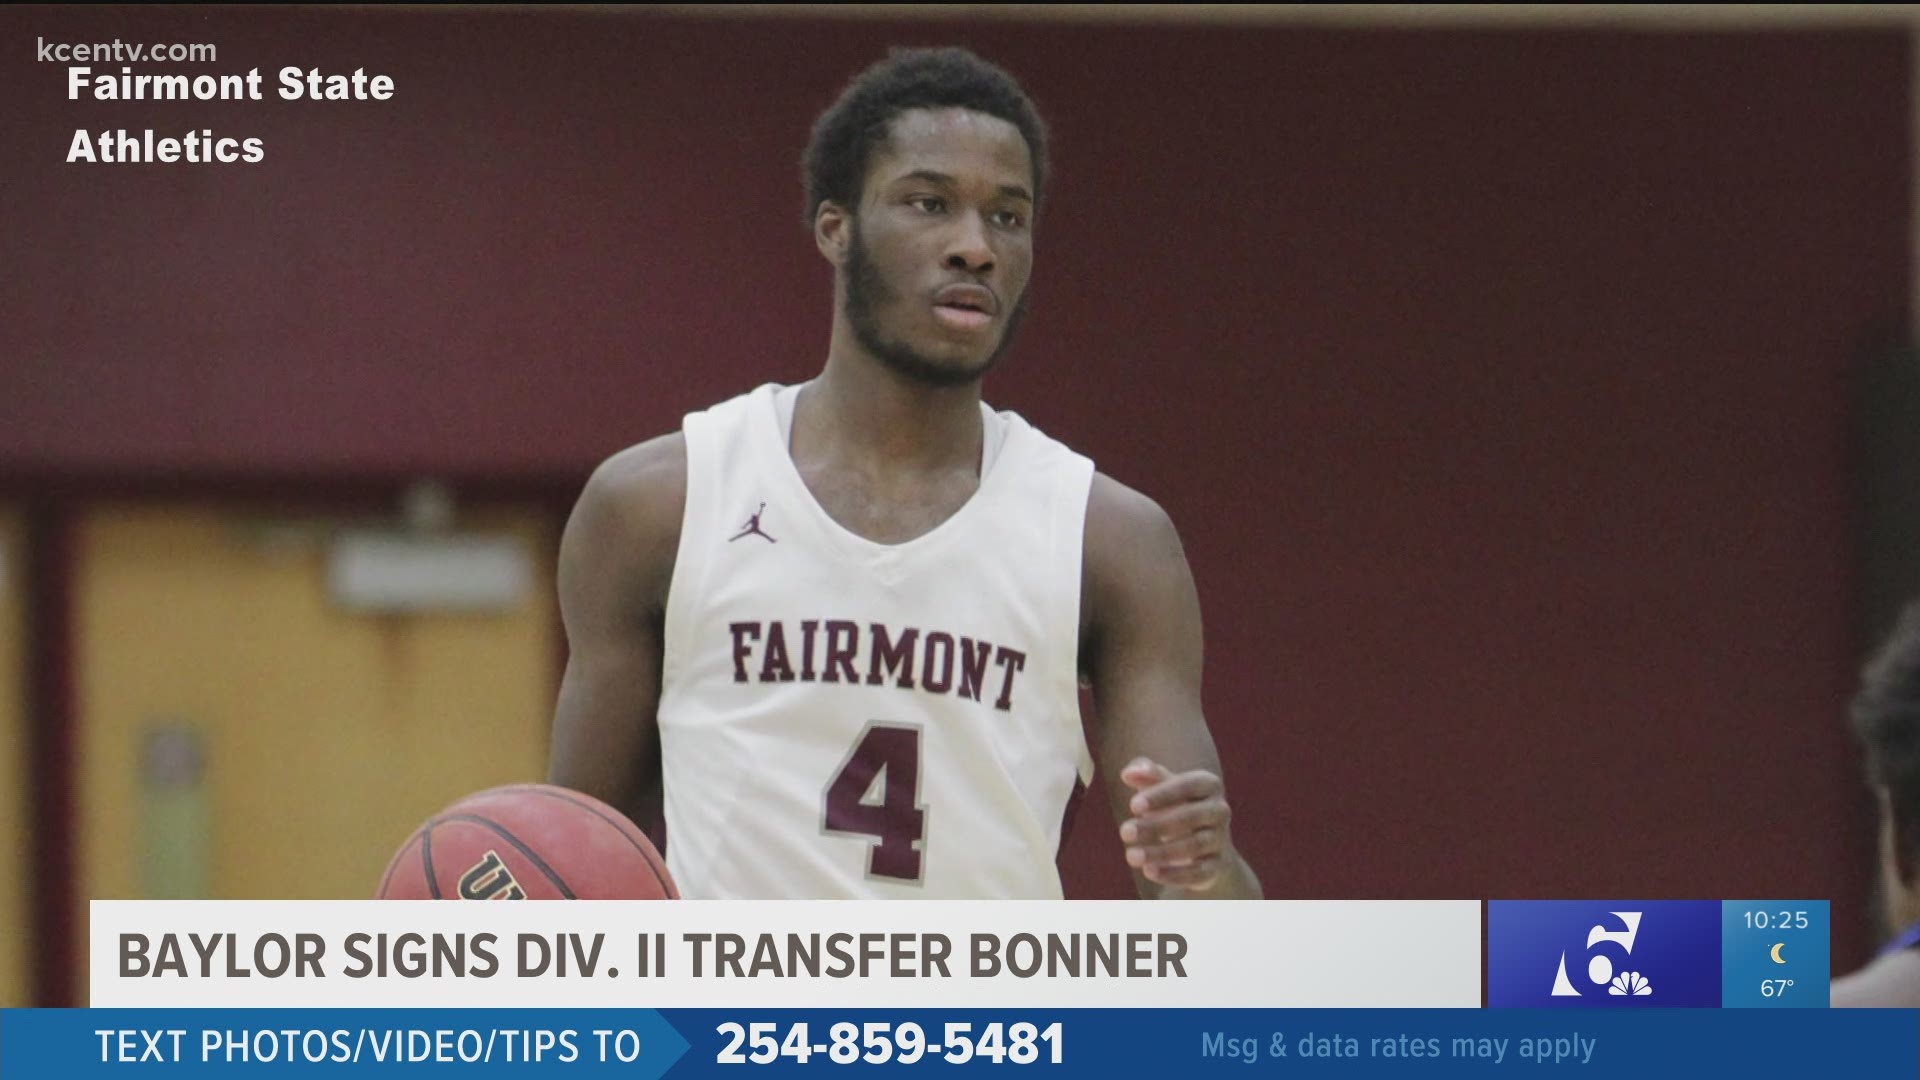 Dale Bonner becomes the second player in the past five off-seasons to transfer to Baylor from a lower division.